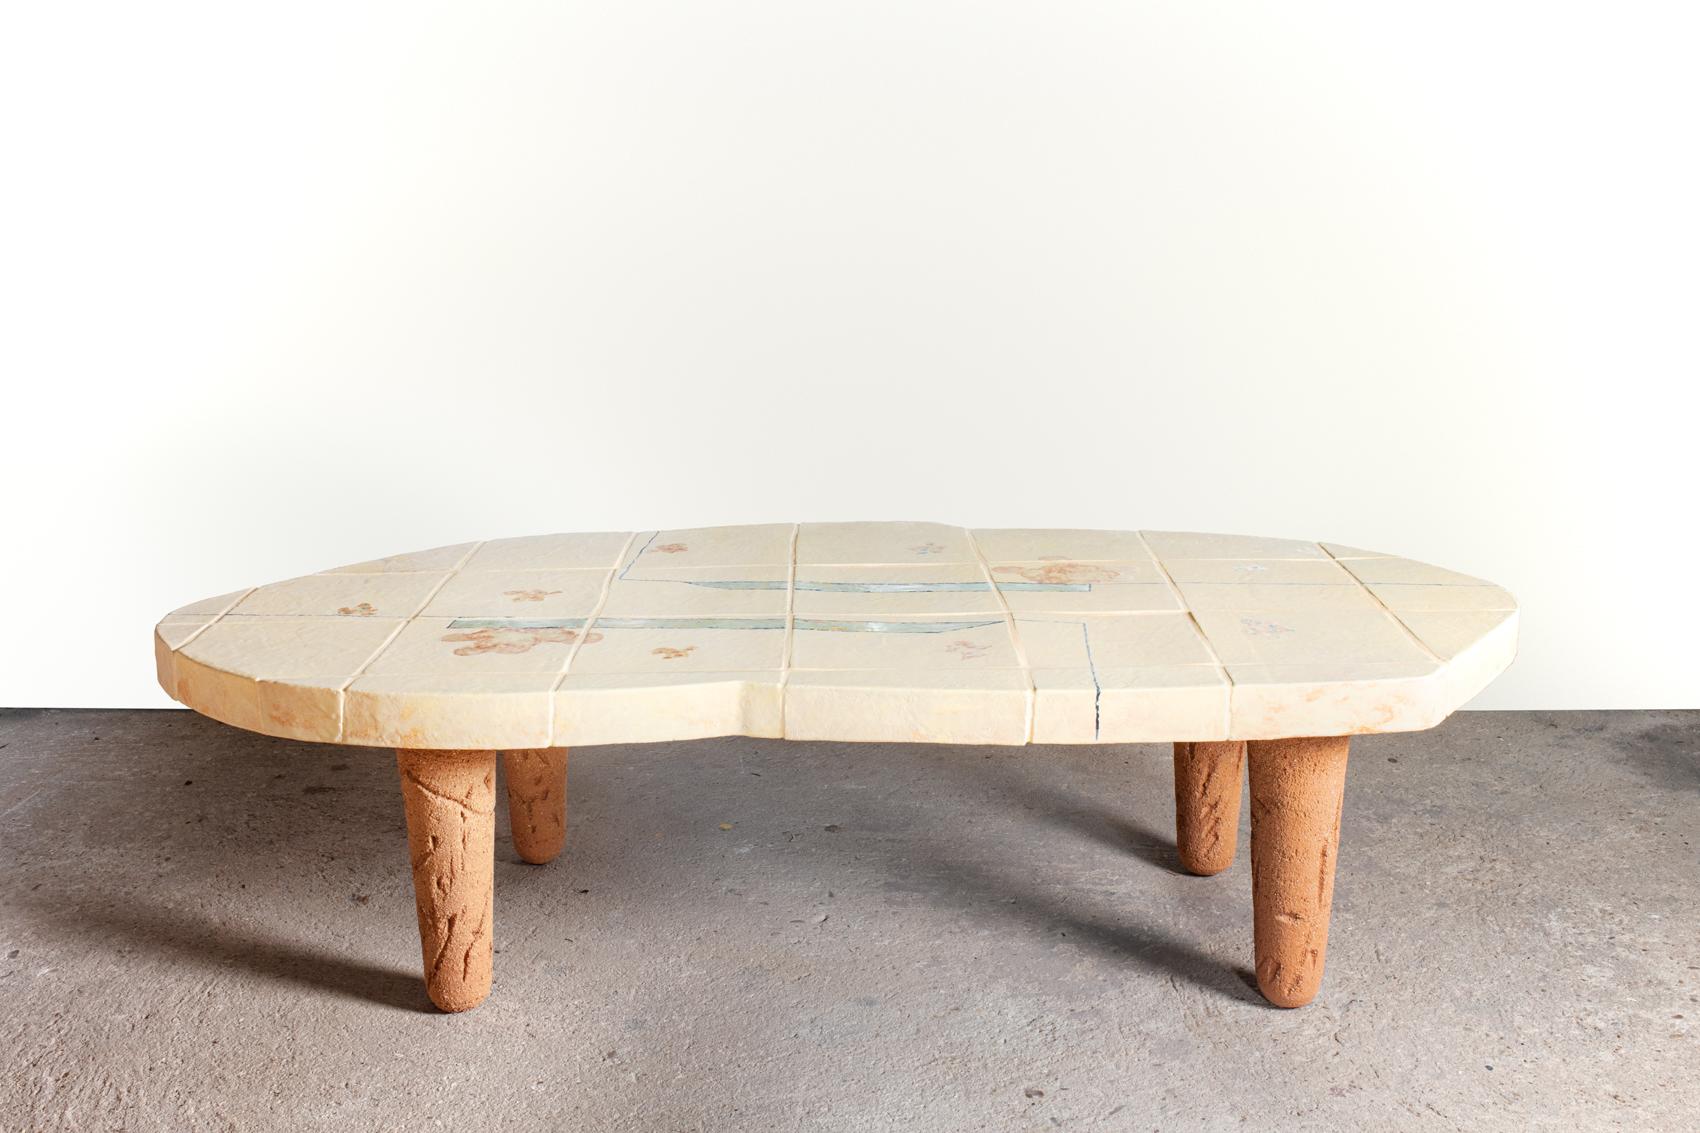 A ceramic coffee table with abstract glaze decoration by Jean-Pierre Viot.
Unique piece.
Signed.
The top and the bases are in ceramic.
2023.
H : 13’8 x 24’8 x 52'4 inches.